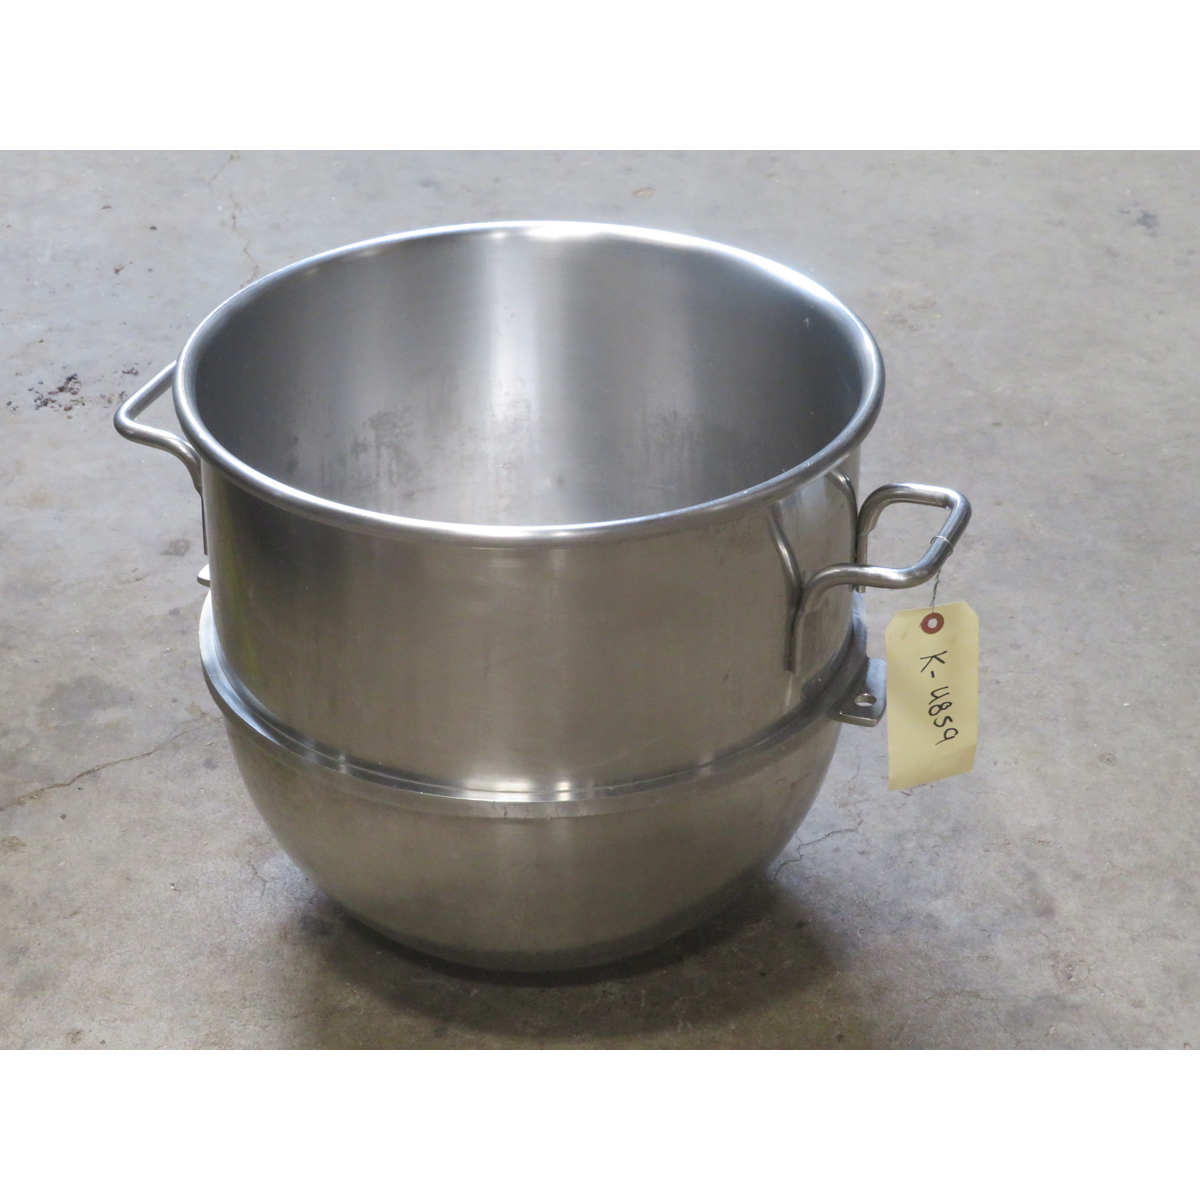 Hobart VMLHP40 40-Quart Bowl For 80 To 40 Bowl Adapter, Used Excellent Condition